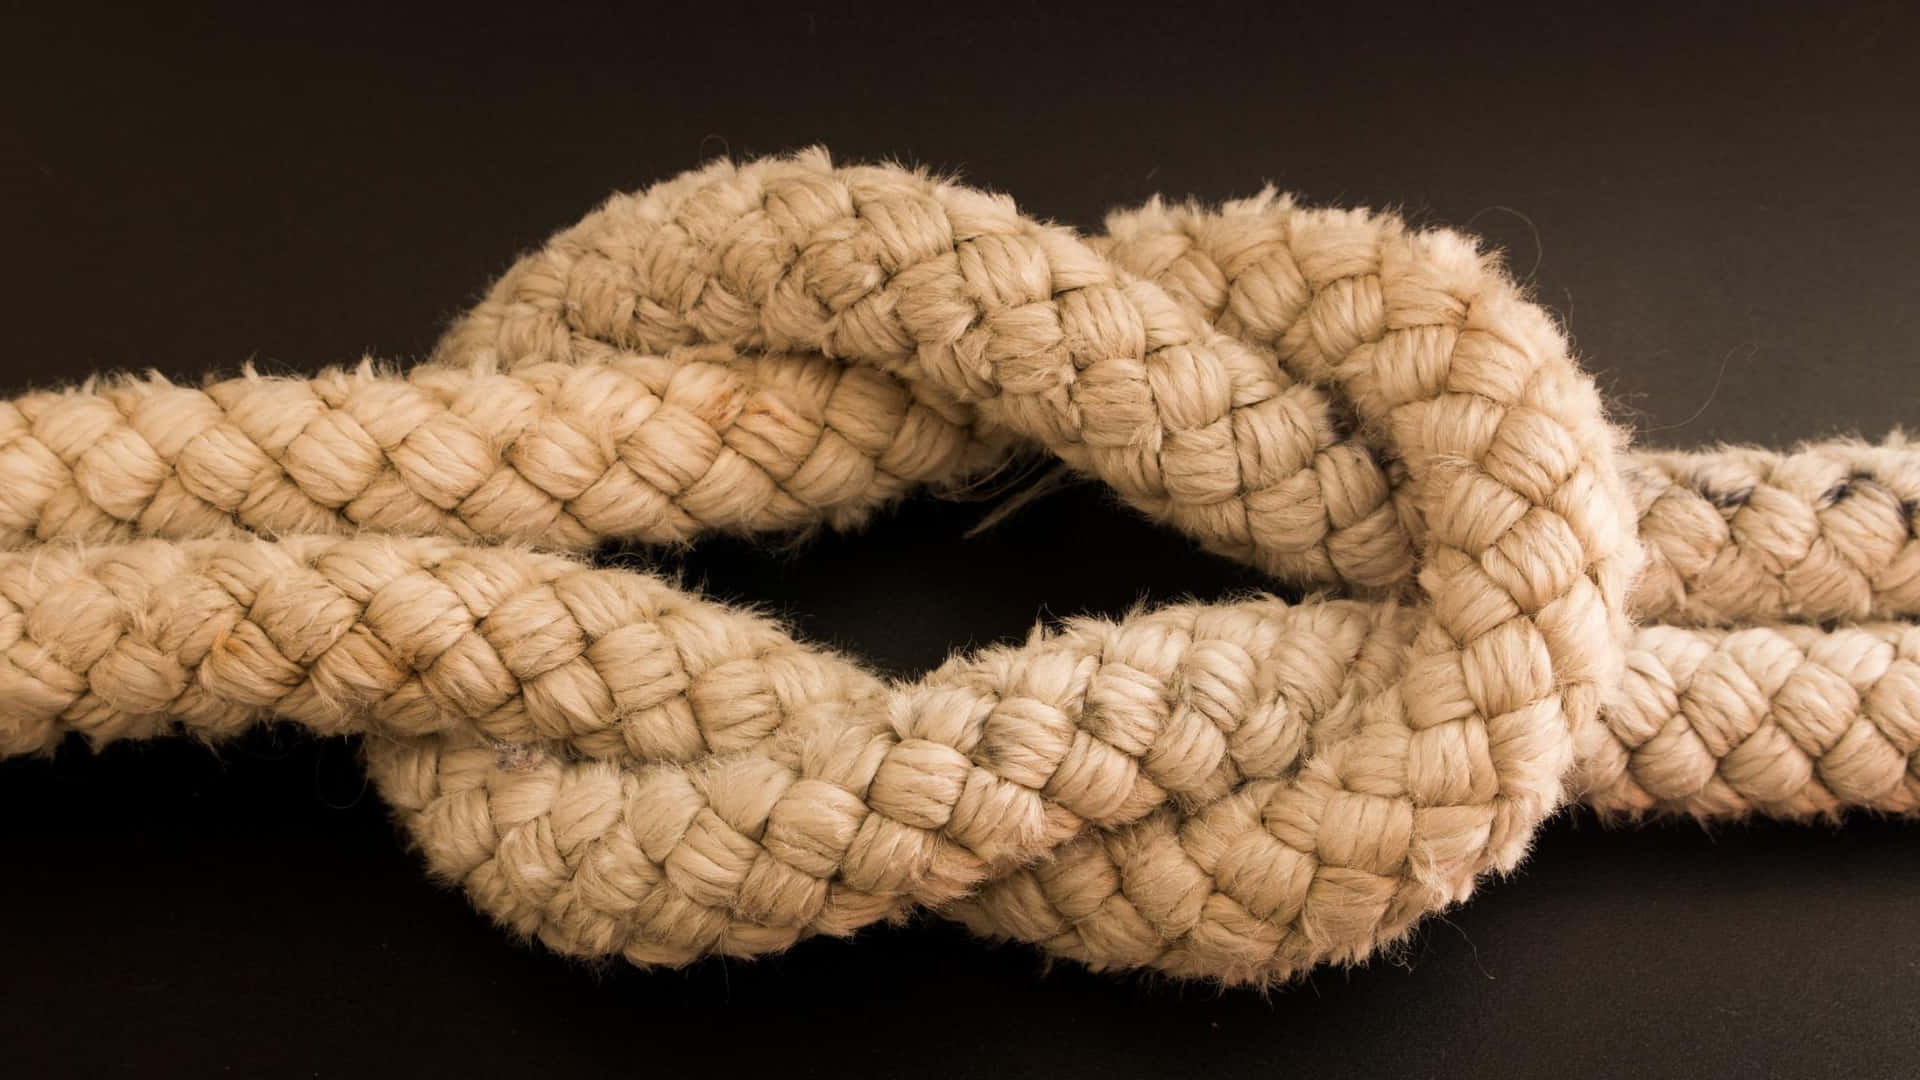 Strength Exemplified - Close-Up of a Twisted Rope